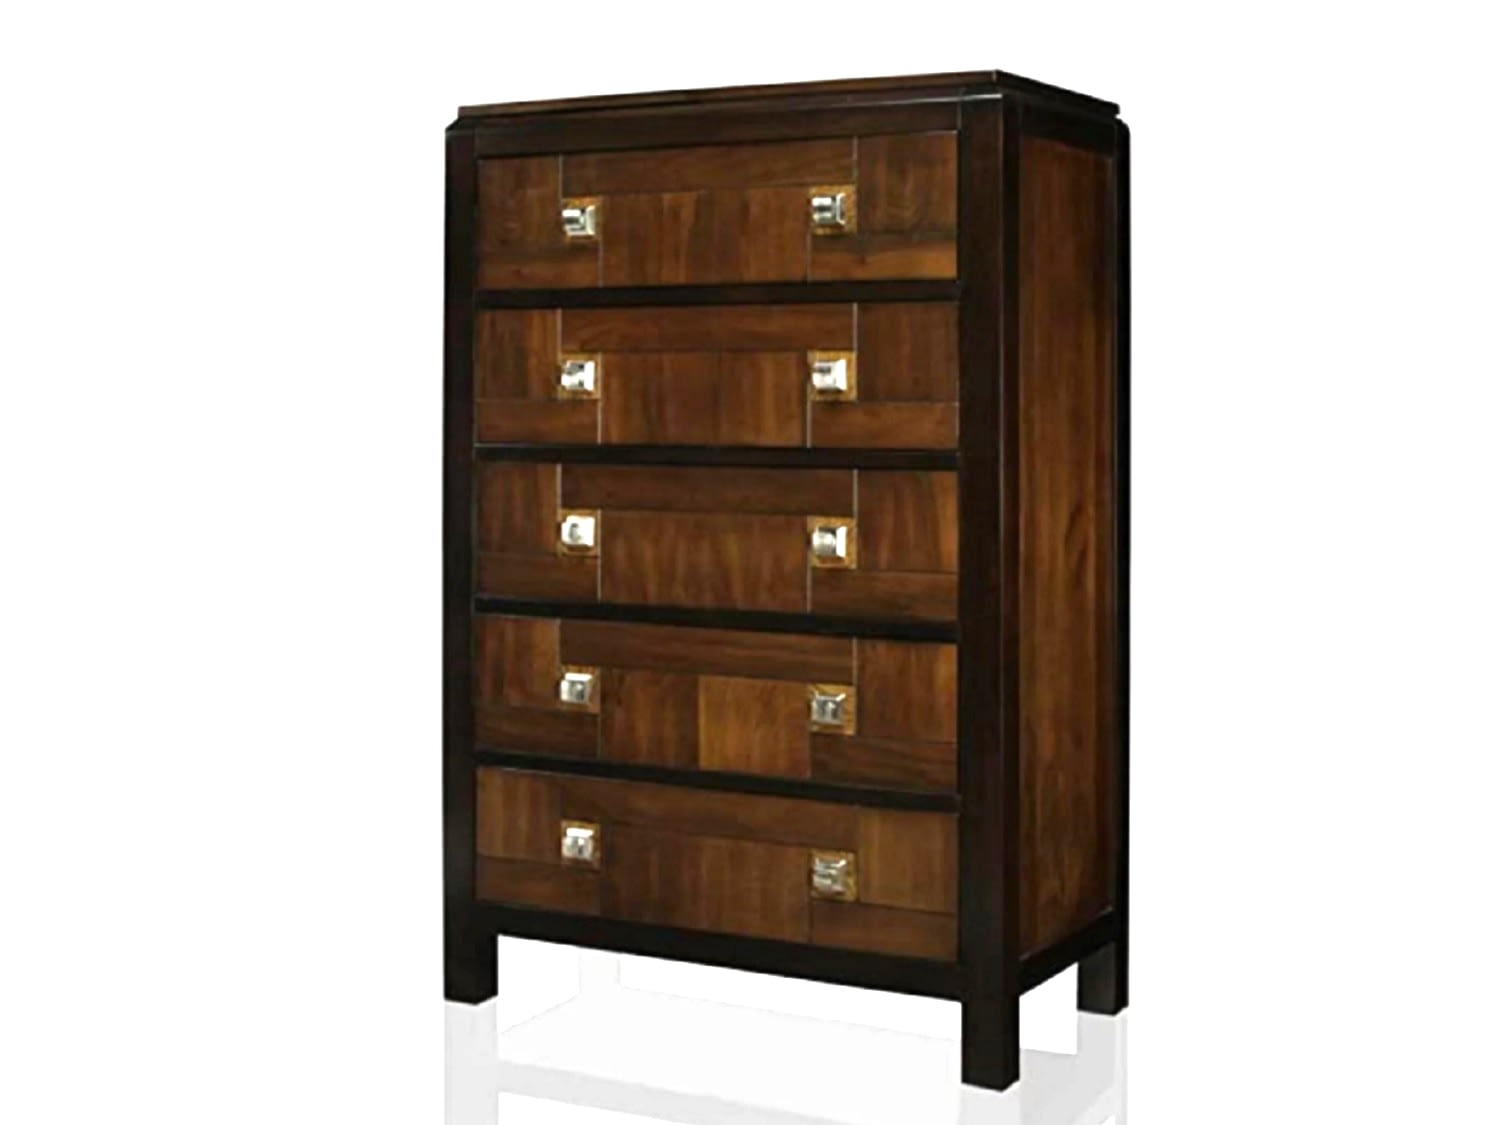 WALDO Chest of Drawers - Zoom